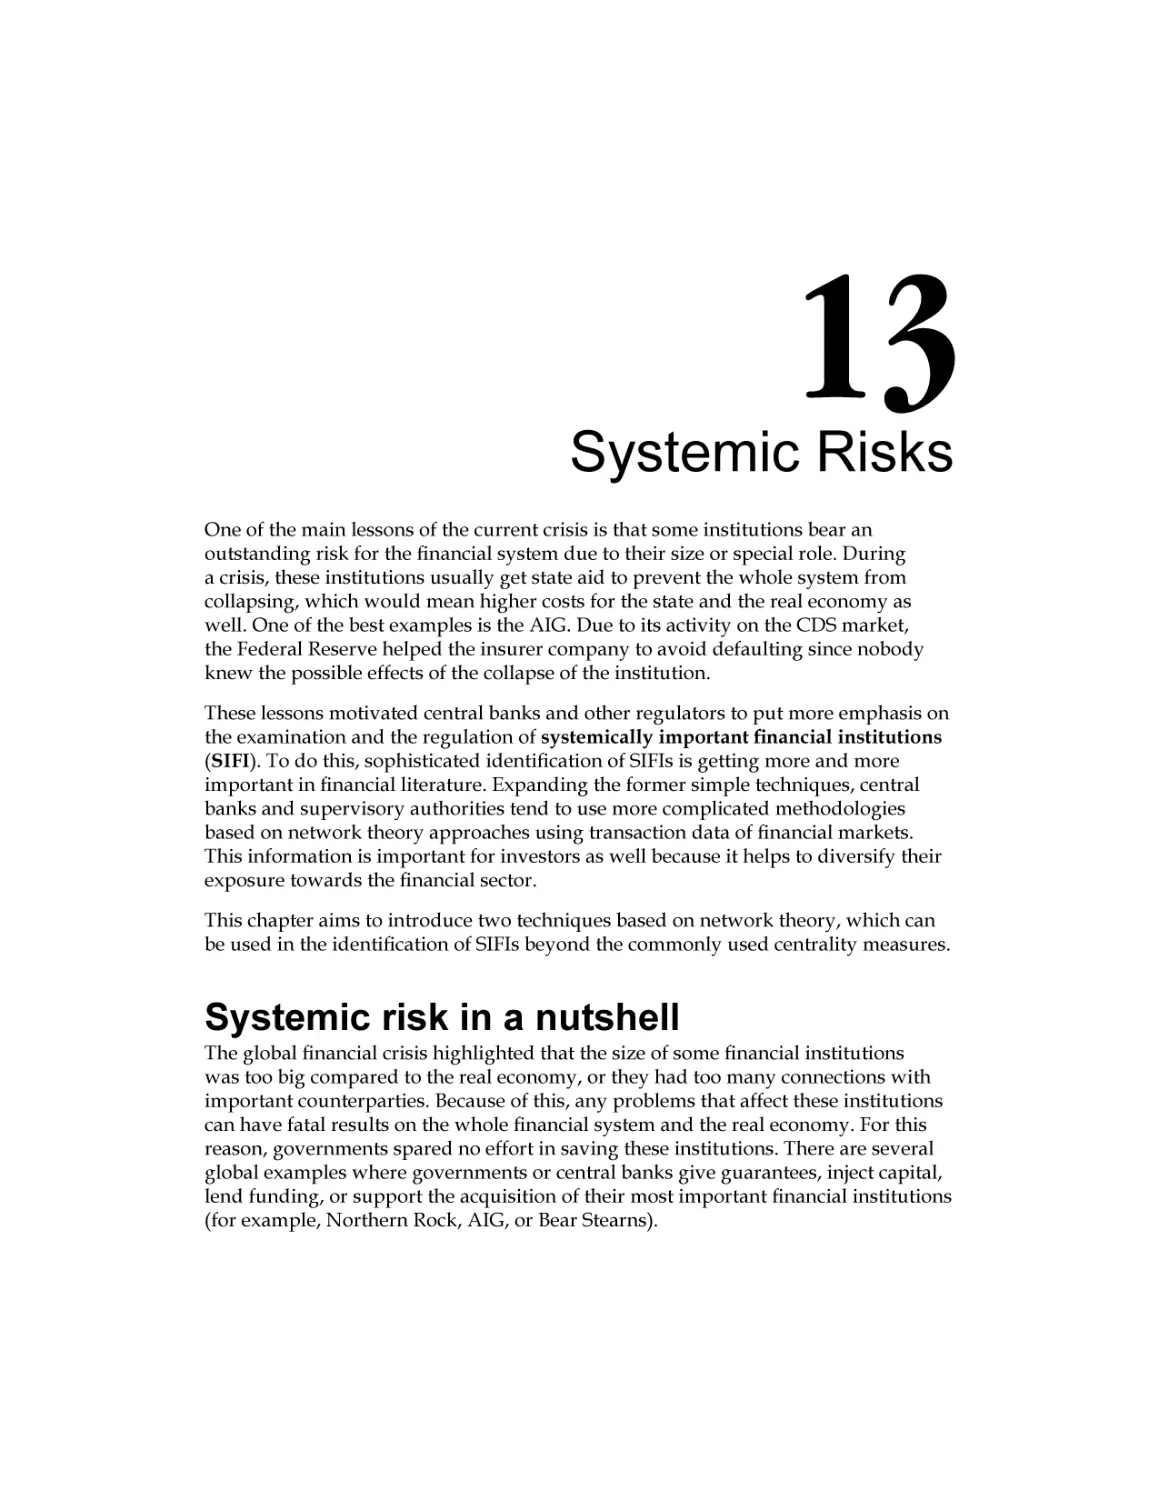 Chapter 13
Systemic risk in a nutshell